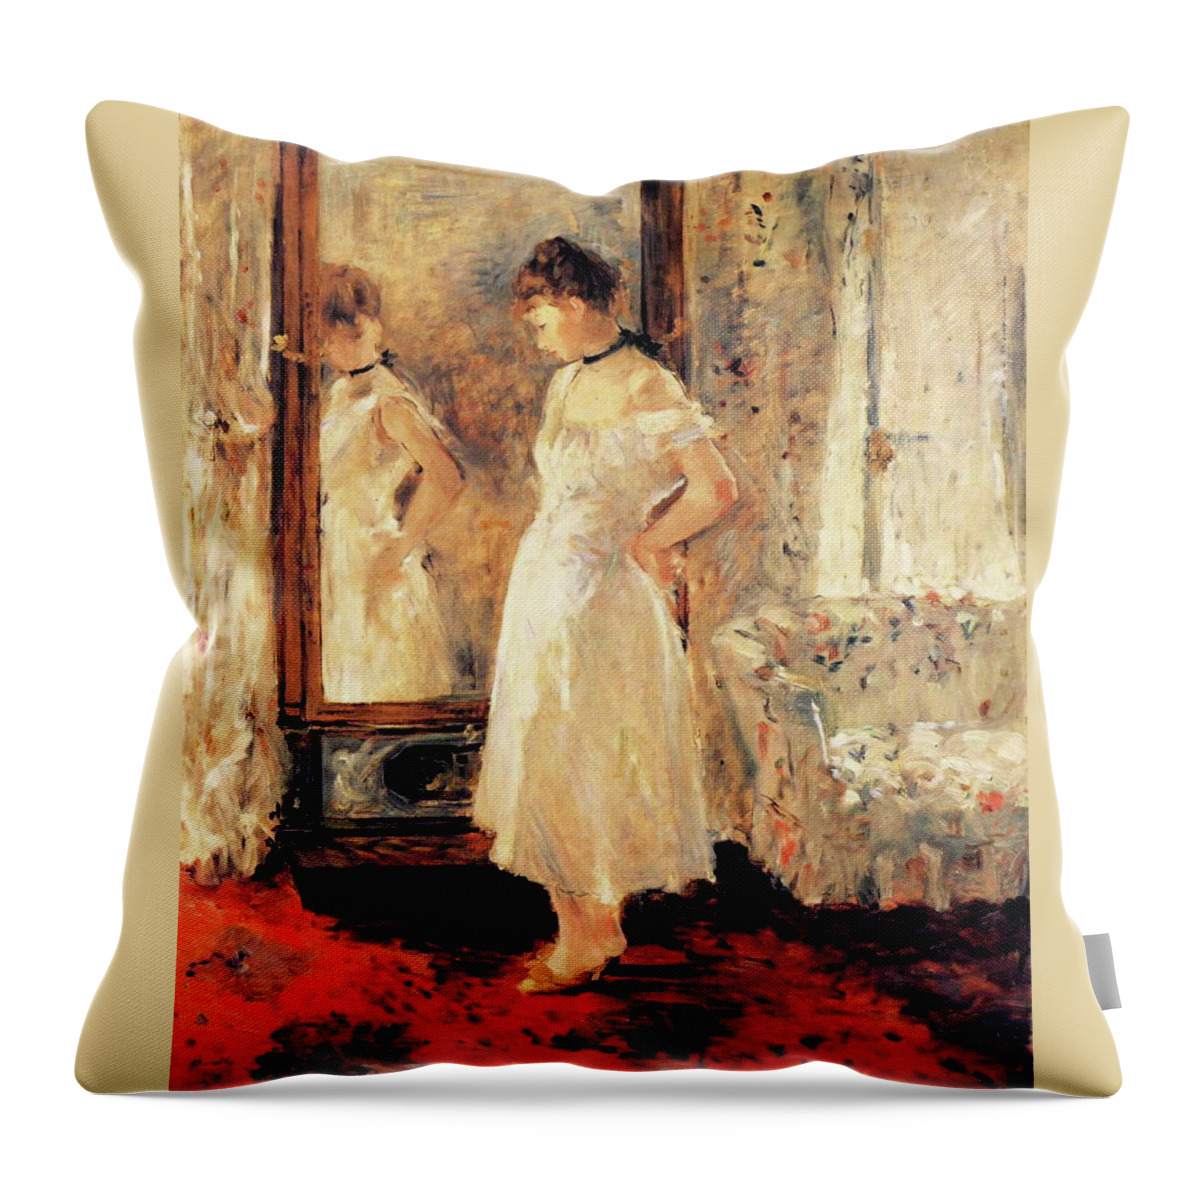 The Cheval Glass Throw Pillow featuring the painting The Cheval Glass by MotionAge Designs